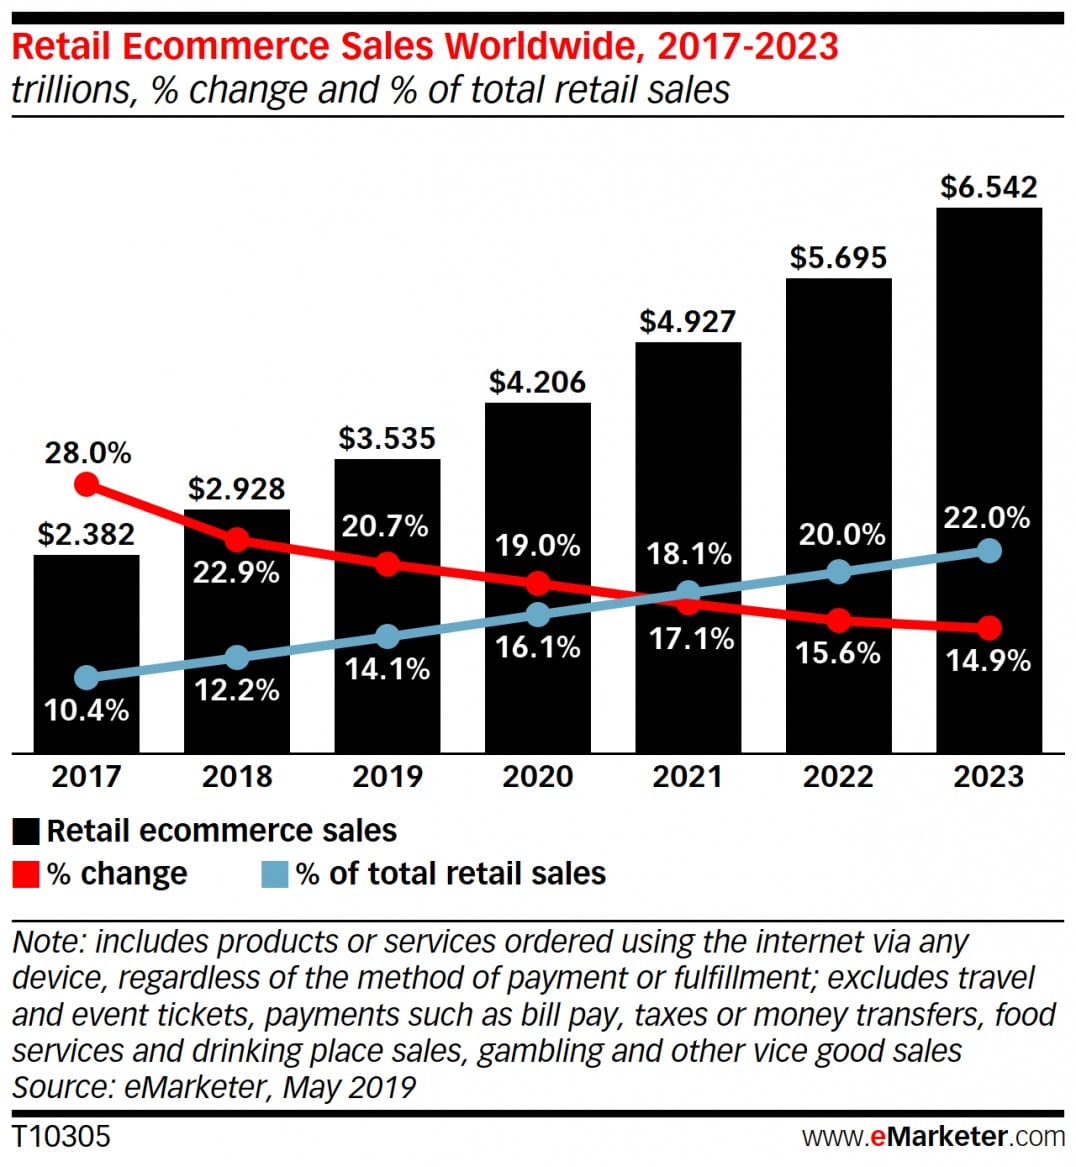 Retail Ecommerce Sales Worldwide from 2017 to 2023